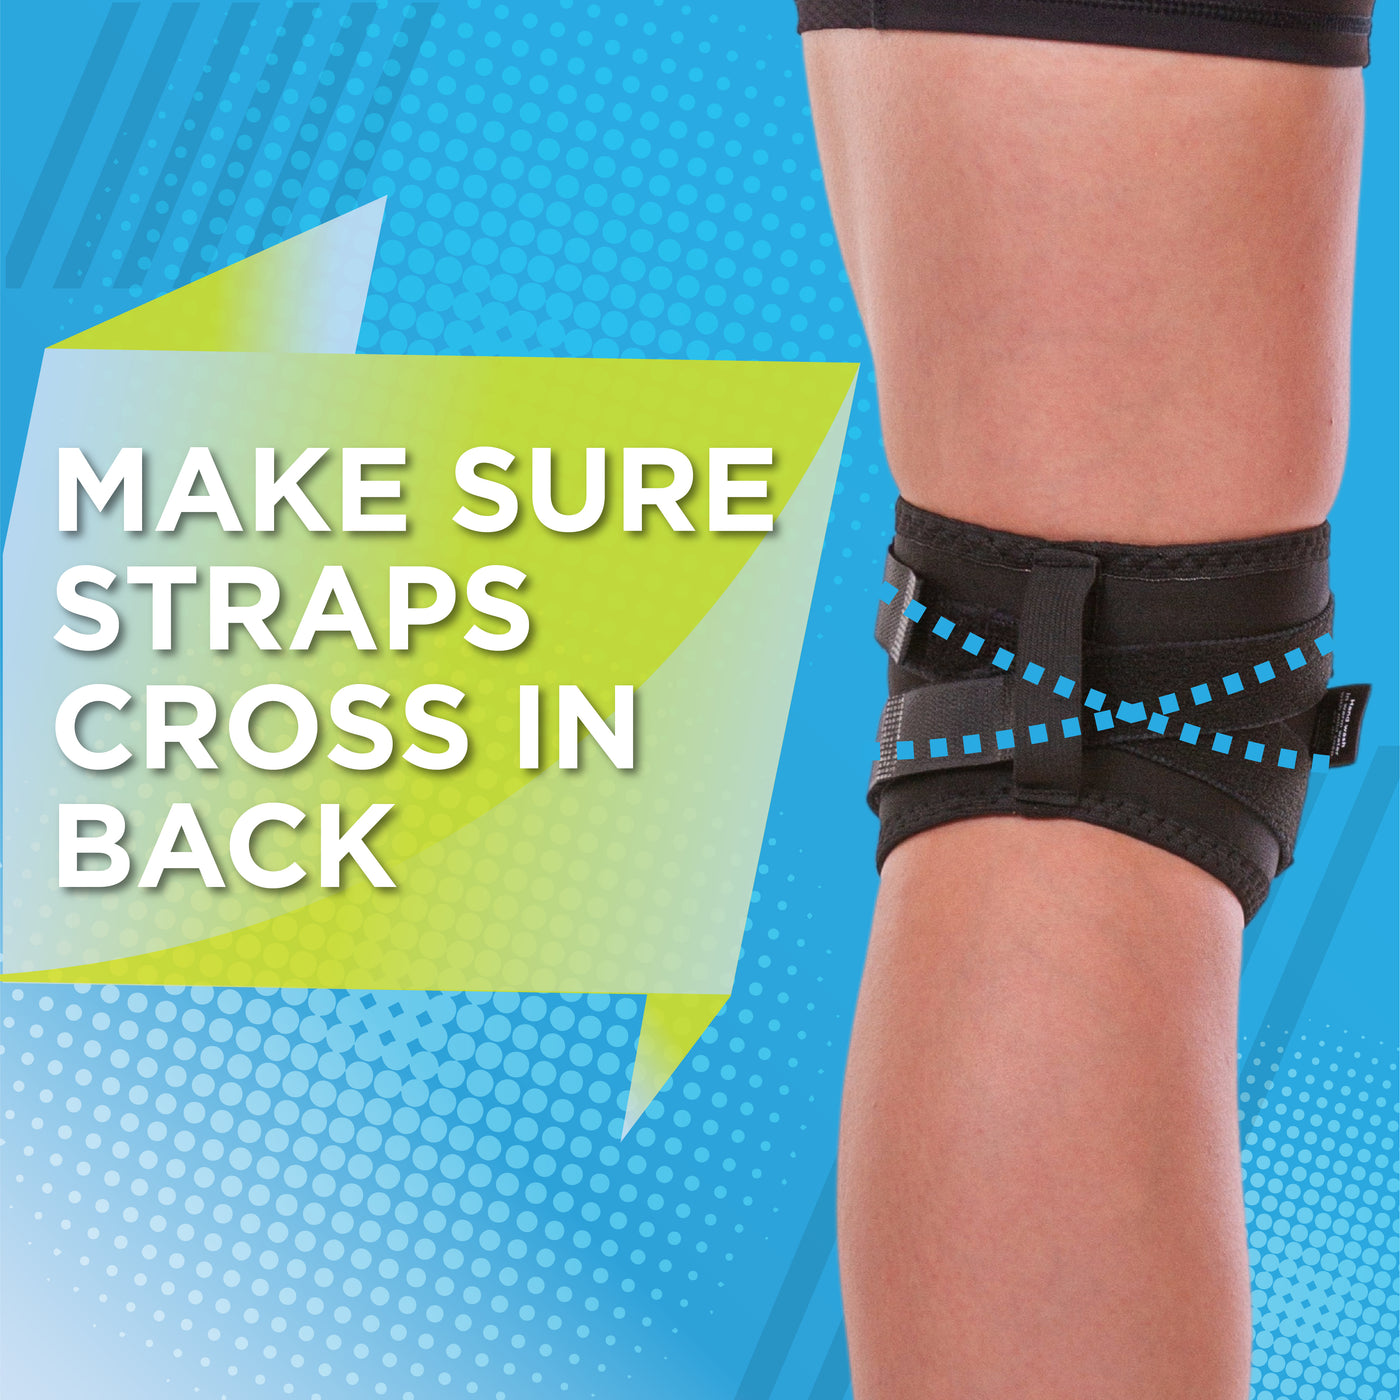 The subluxation knee brace for working out has straps that cross in the back